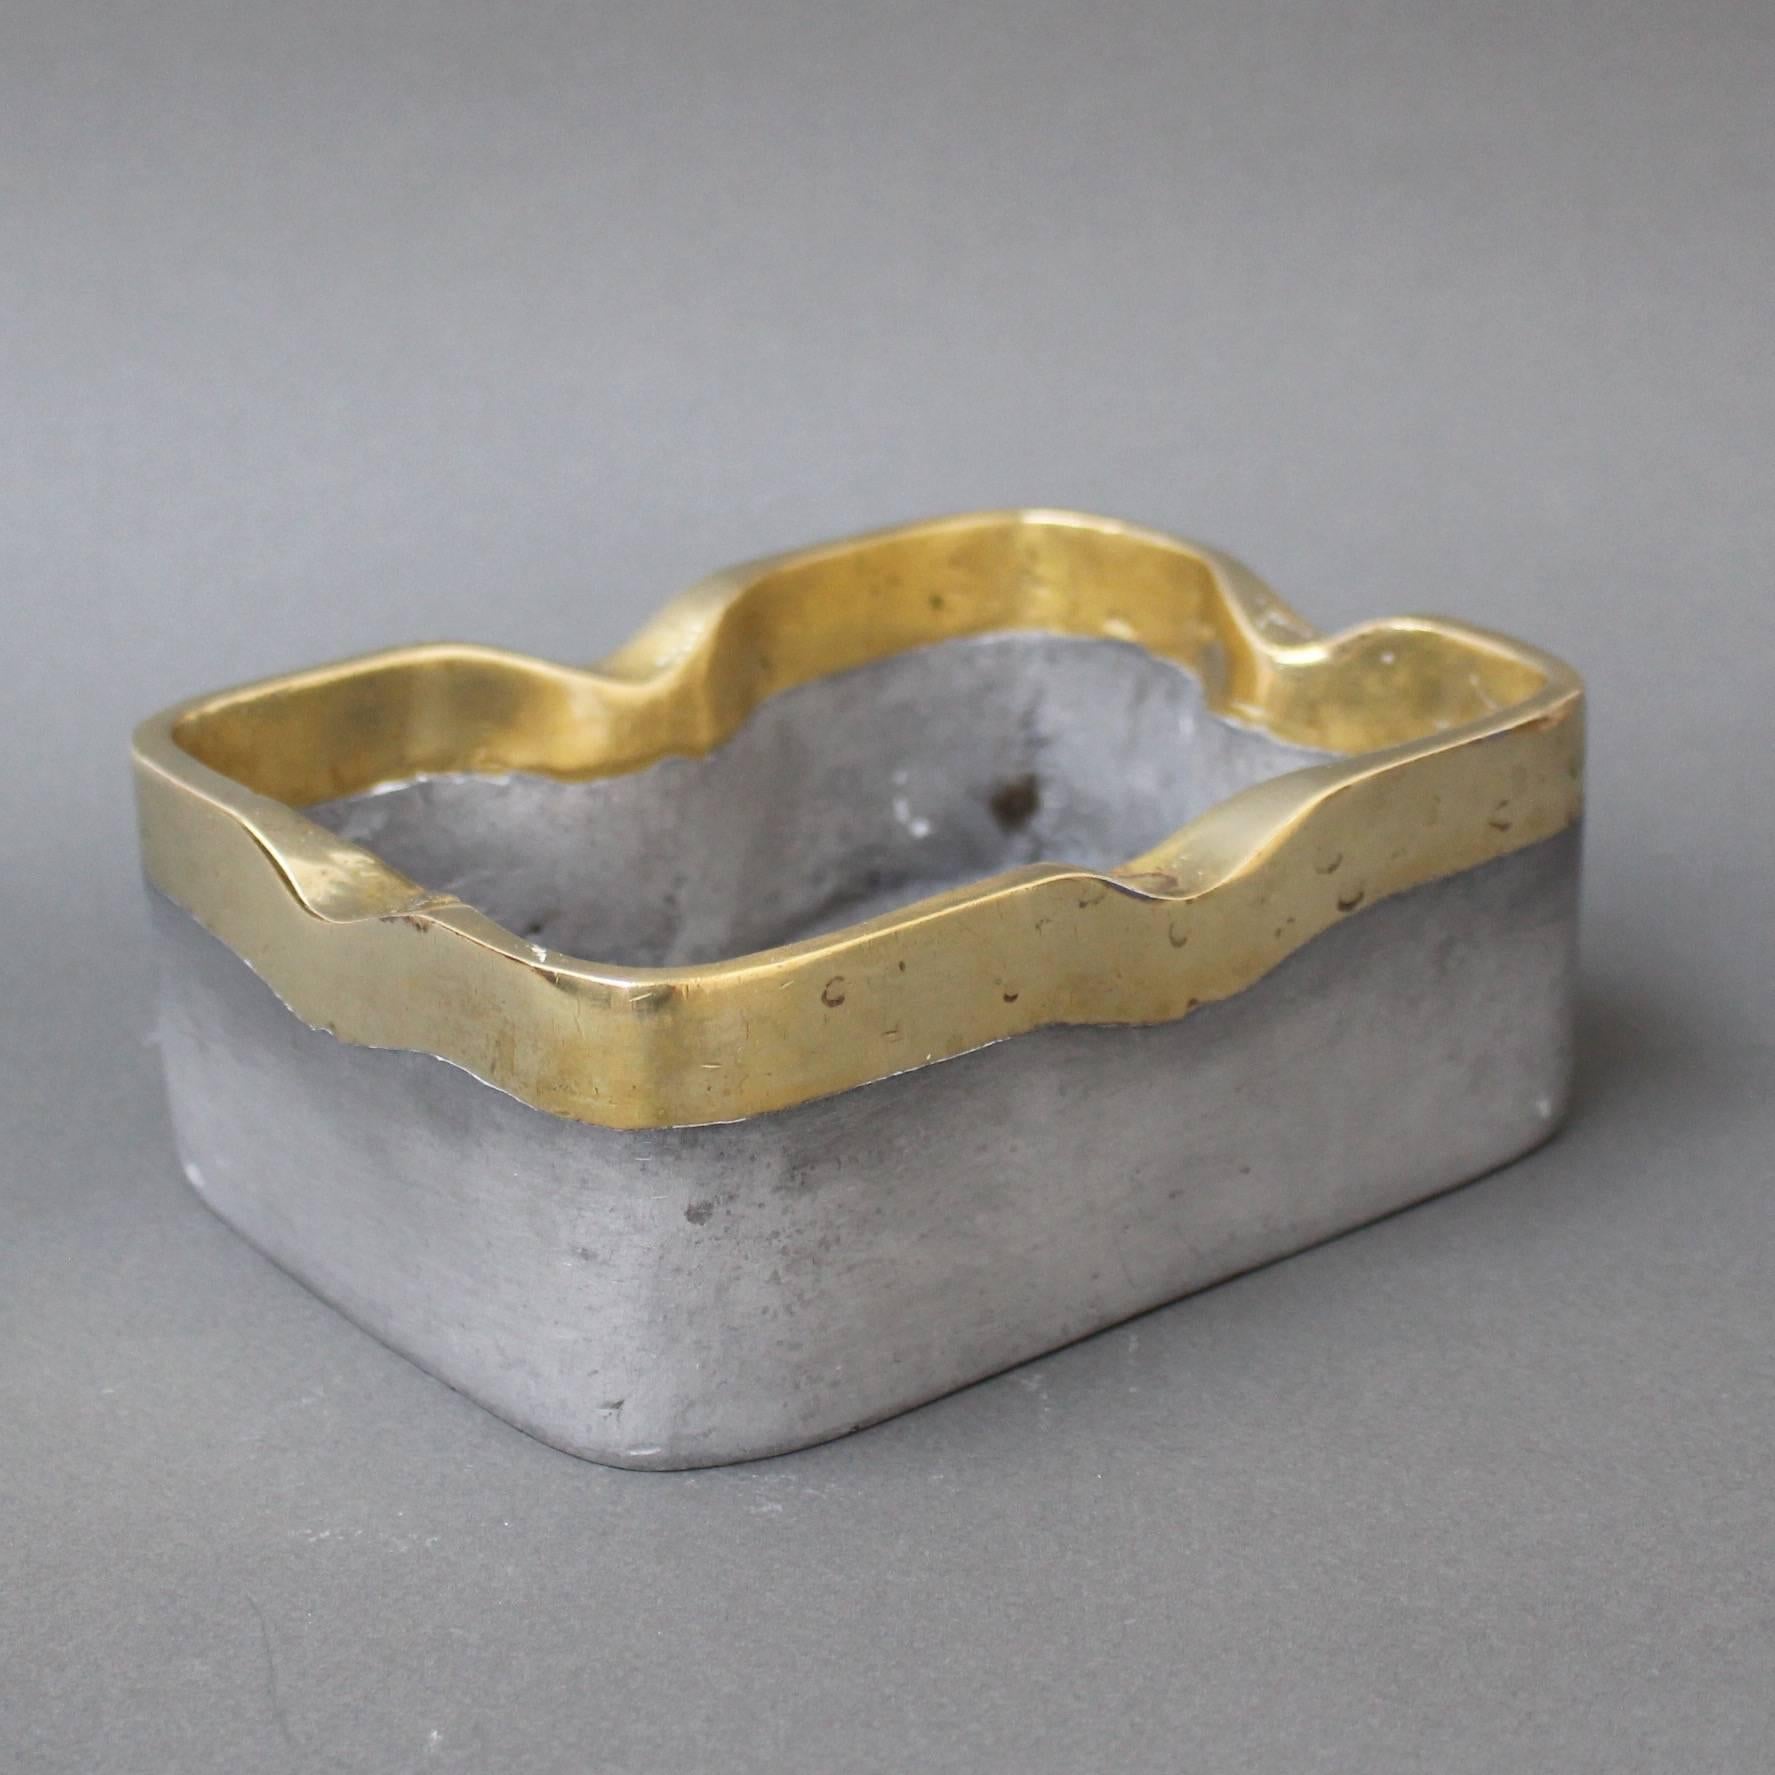 This aluminium and brass Brutalist style decorative ashtray by David Marshall is weighty and wonderfully tactile with the maker's mark impressed lightly on the aluminium side. This piece is in very good vintage condition with characterful marks